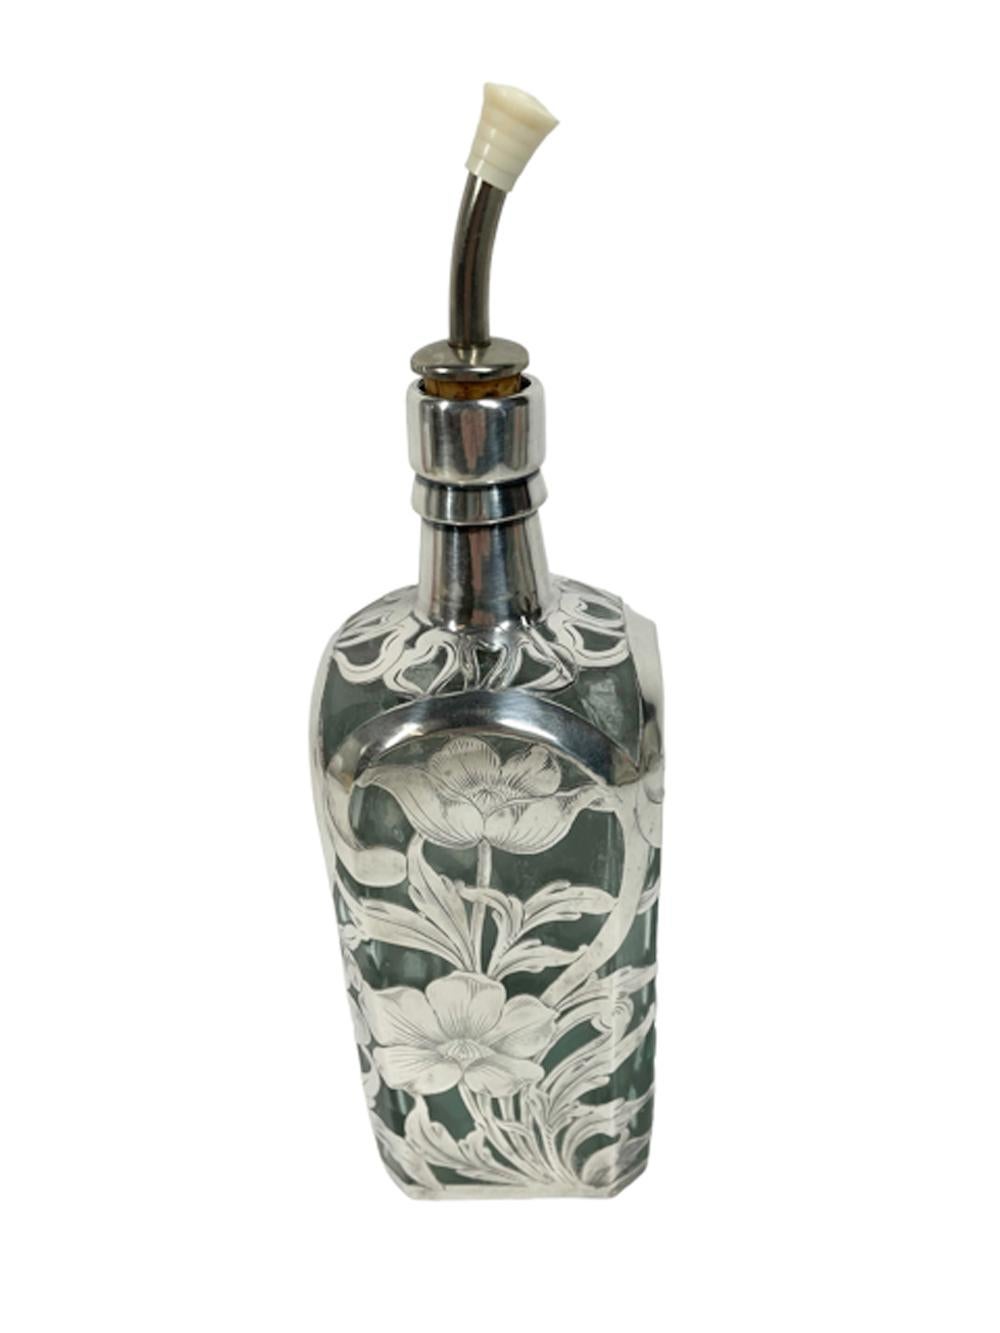 Late 19th Century Silver Overlay Gordon's Dry Gin Bottle - Sterling Poppies For Sale 1